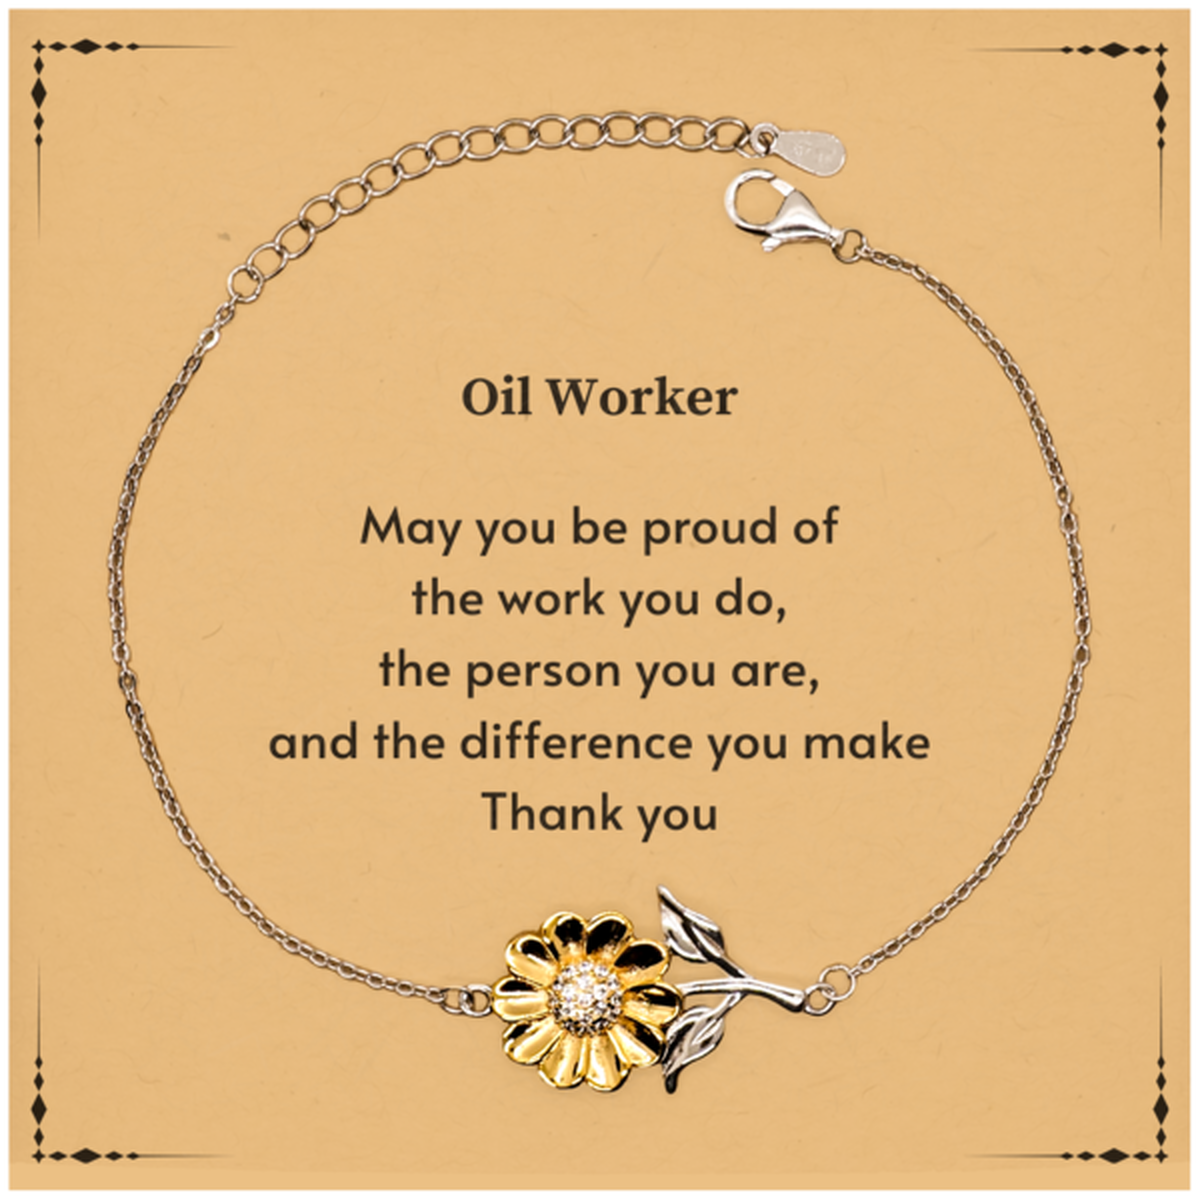 Heartwarming Sunflower Bracelet Retirement Coworkers Gifts for Oil Worker, Oil Worker May You be proud of the work you do, the person you are Gifts for Boss Men Women Friends